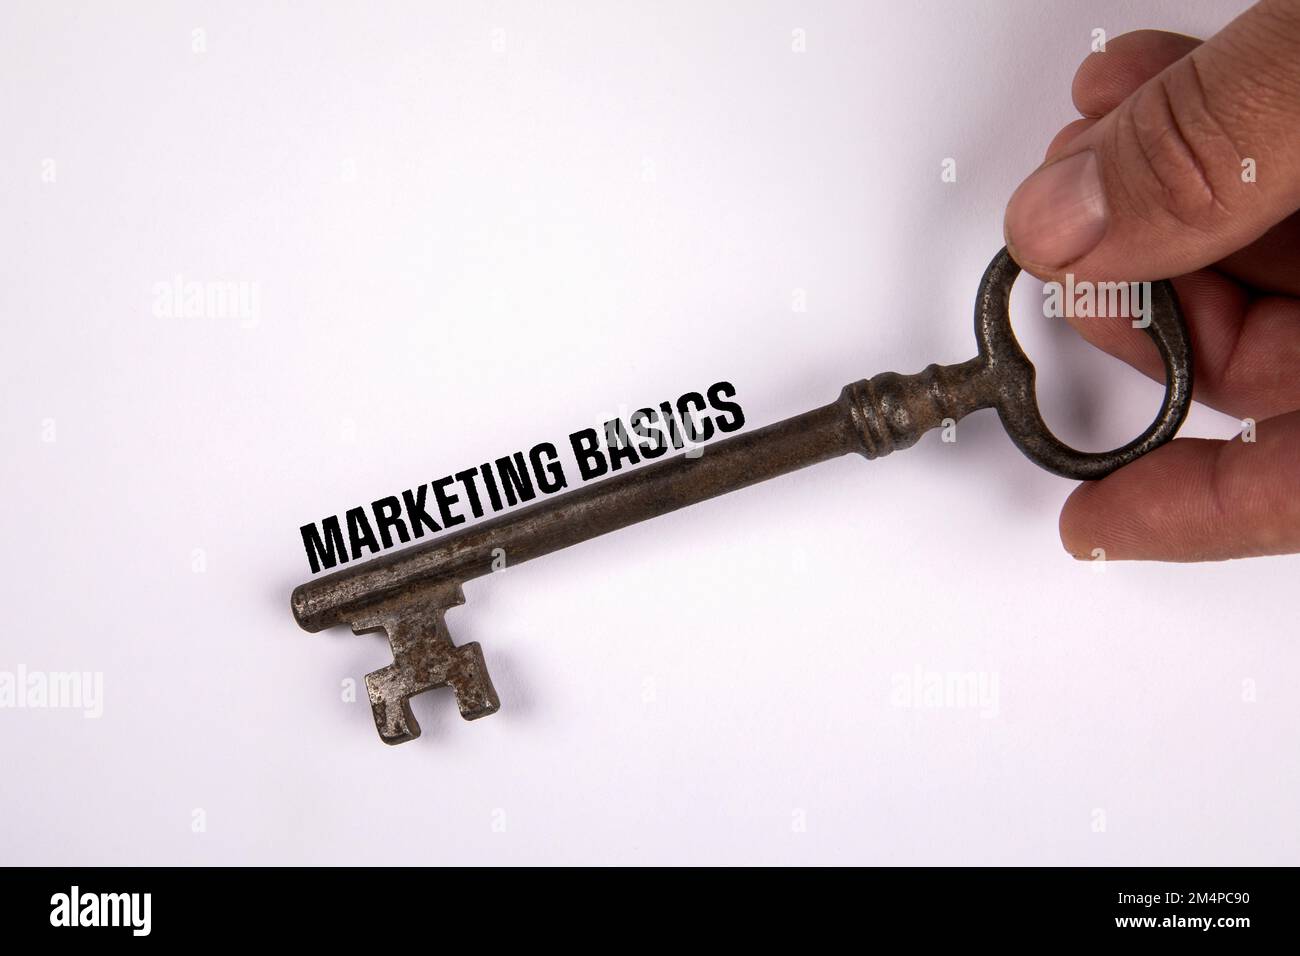 Marketing Basics concept. Knowledge and learning. Old key on a white background. Stock Photo